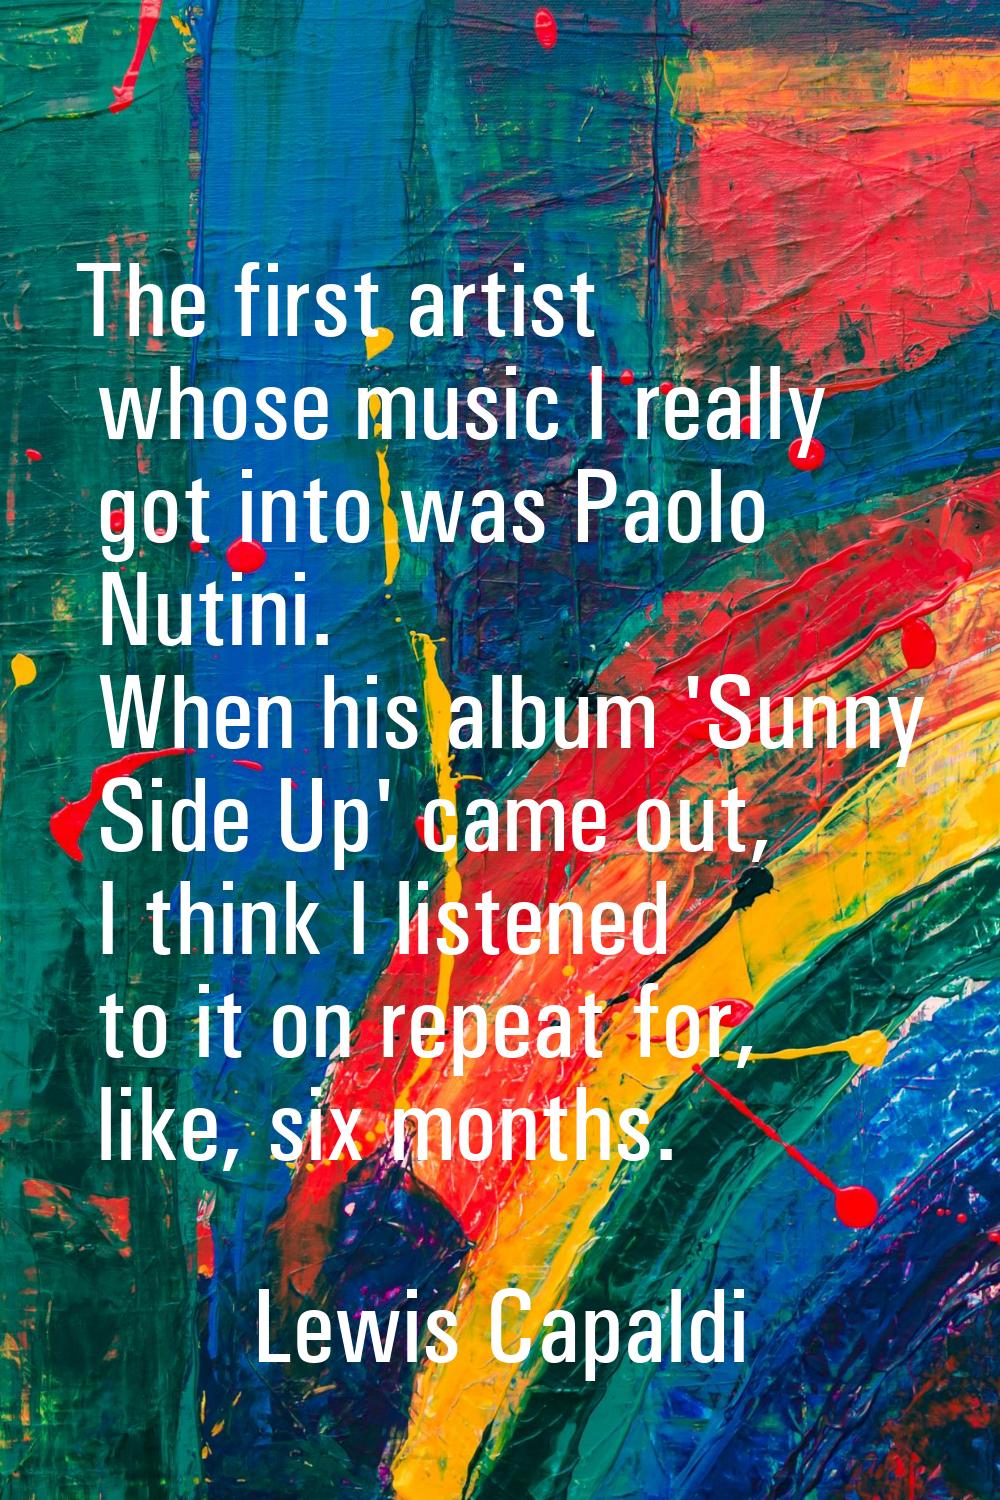 The first artist whose music I really got into was Paolo Nutini. When his album 'Sunny Side Up' cam